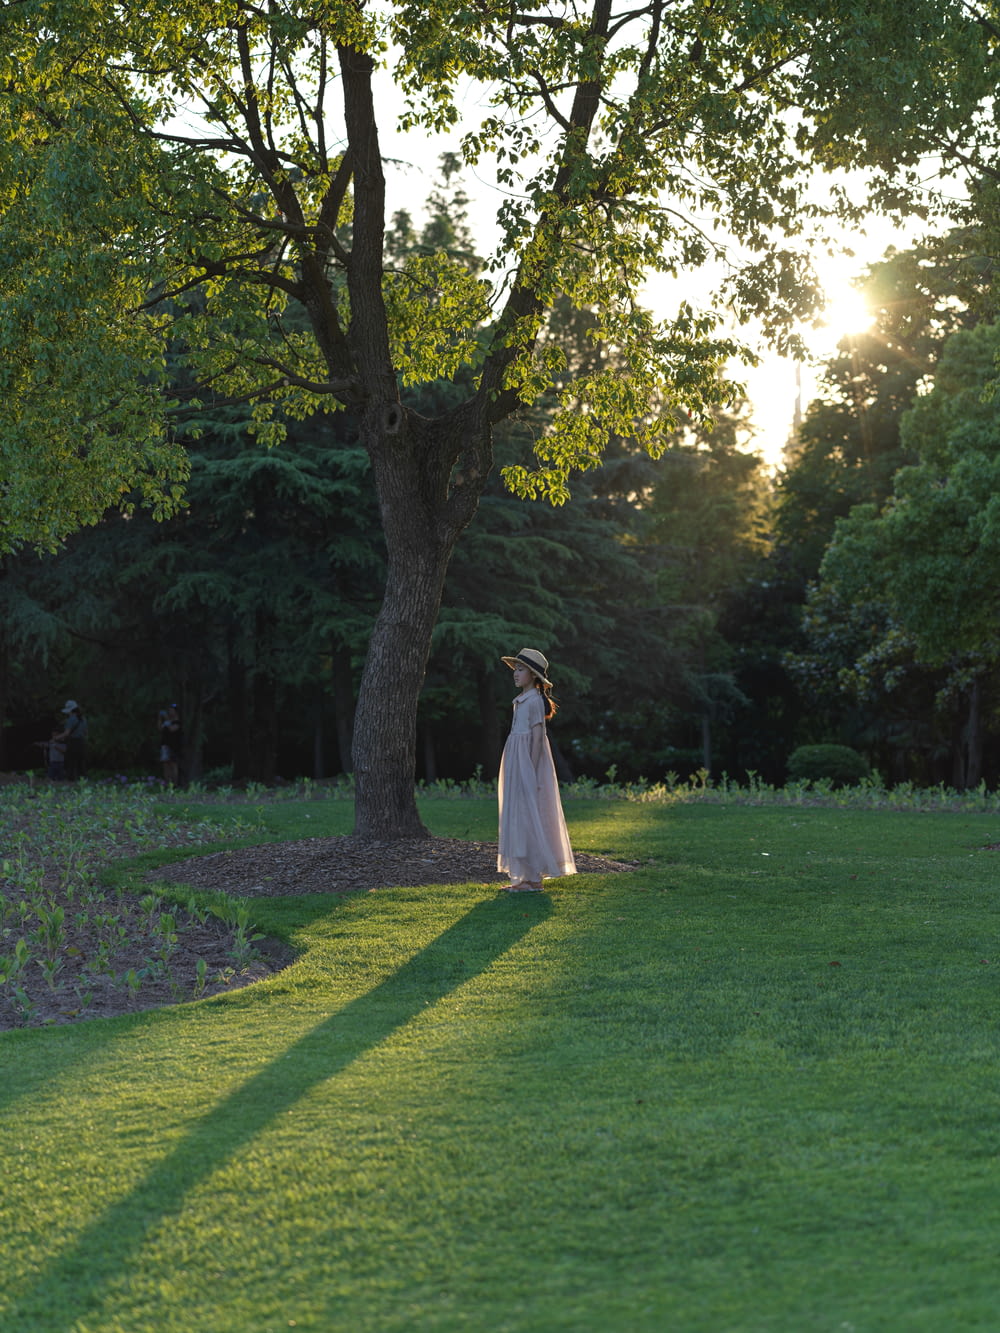 woman in white dress walking on green grass field during daytime